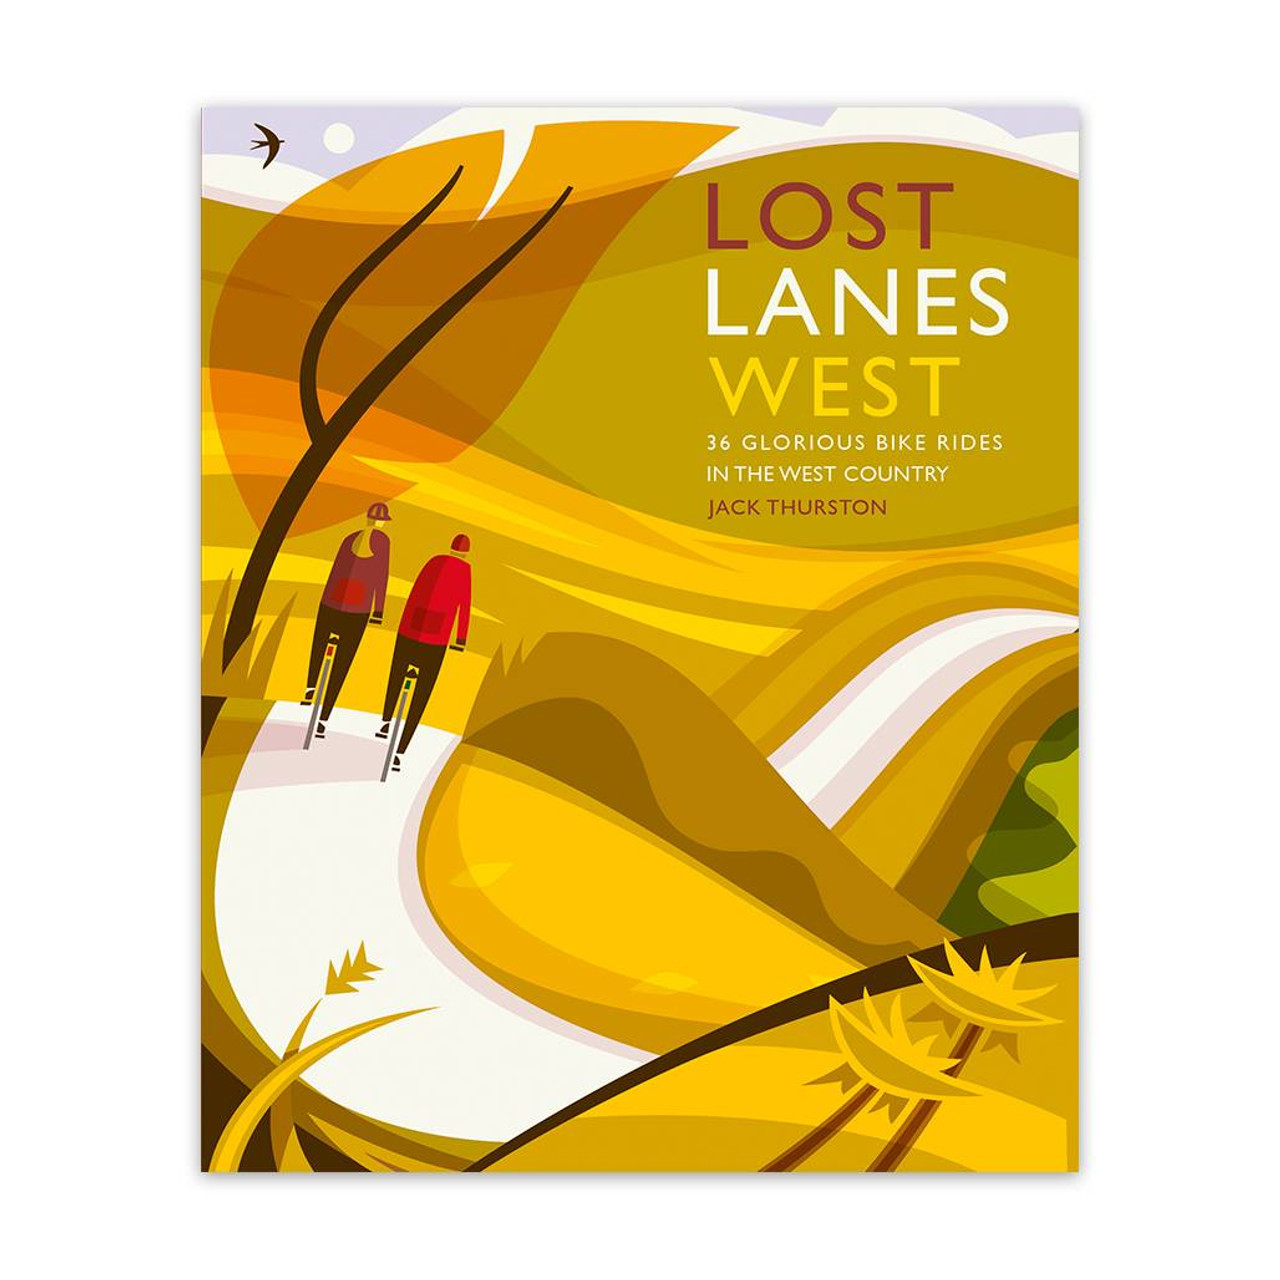 Lost Lanes West Country: 36 Glorious Bike Rides